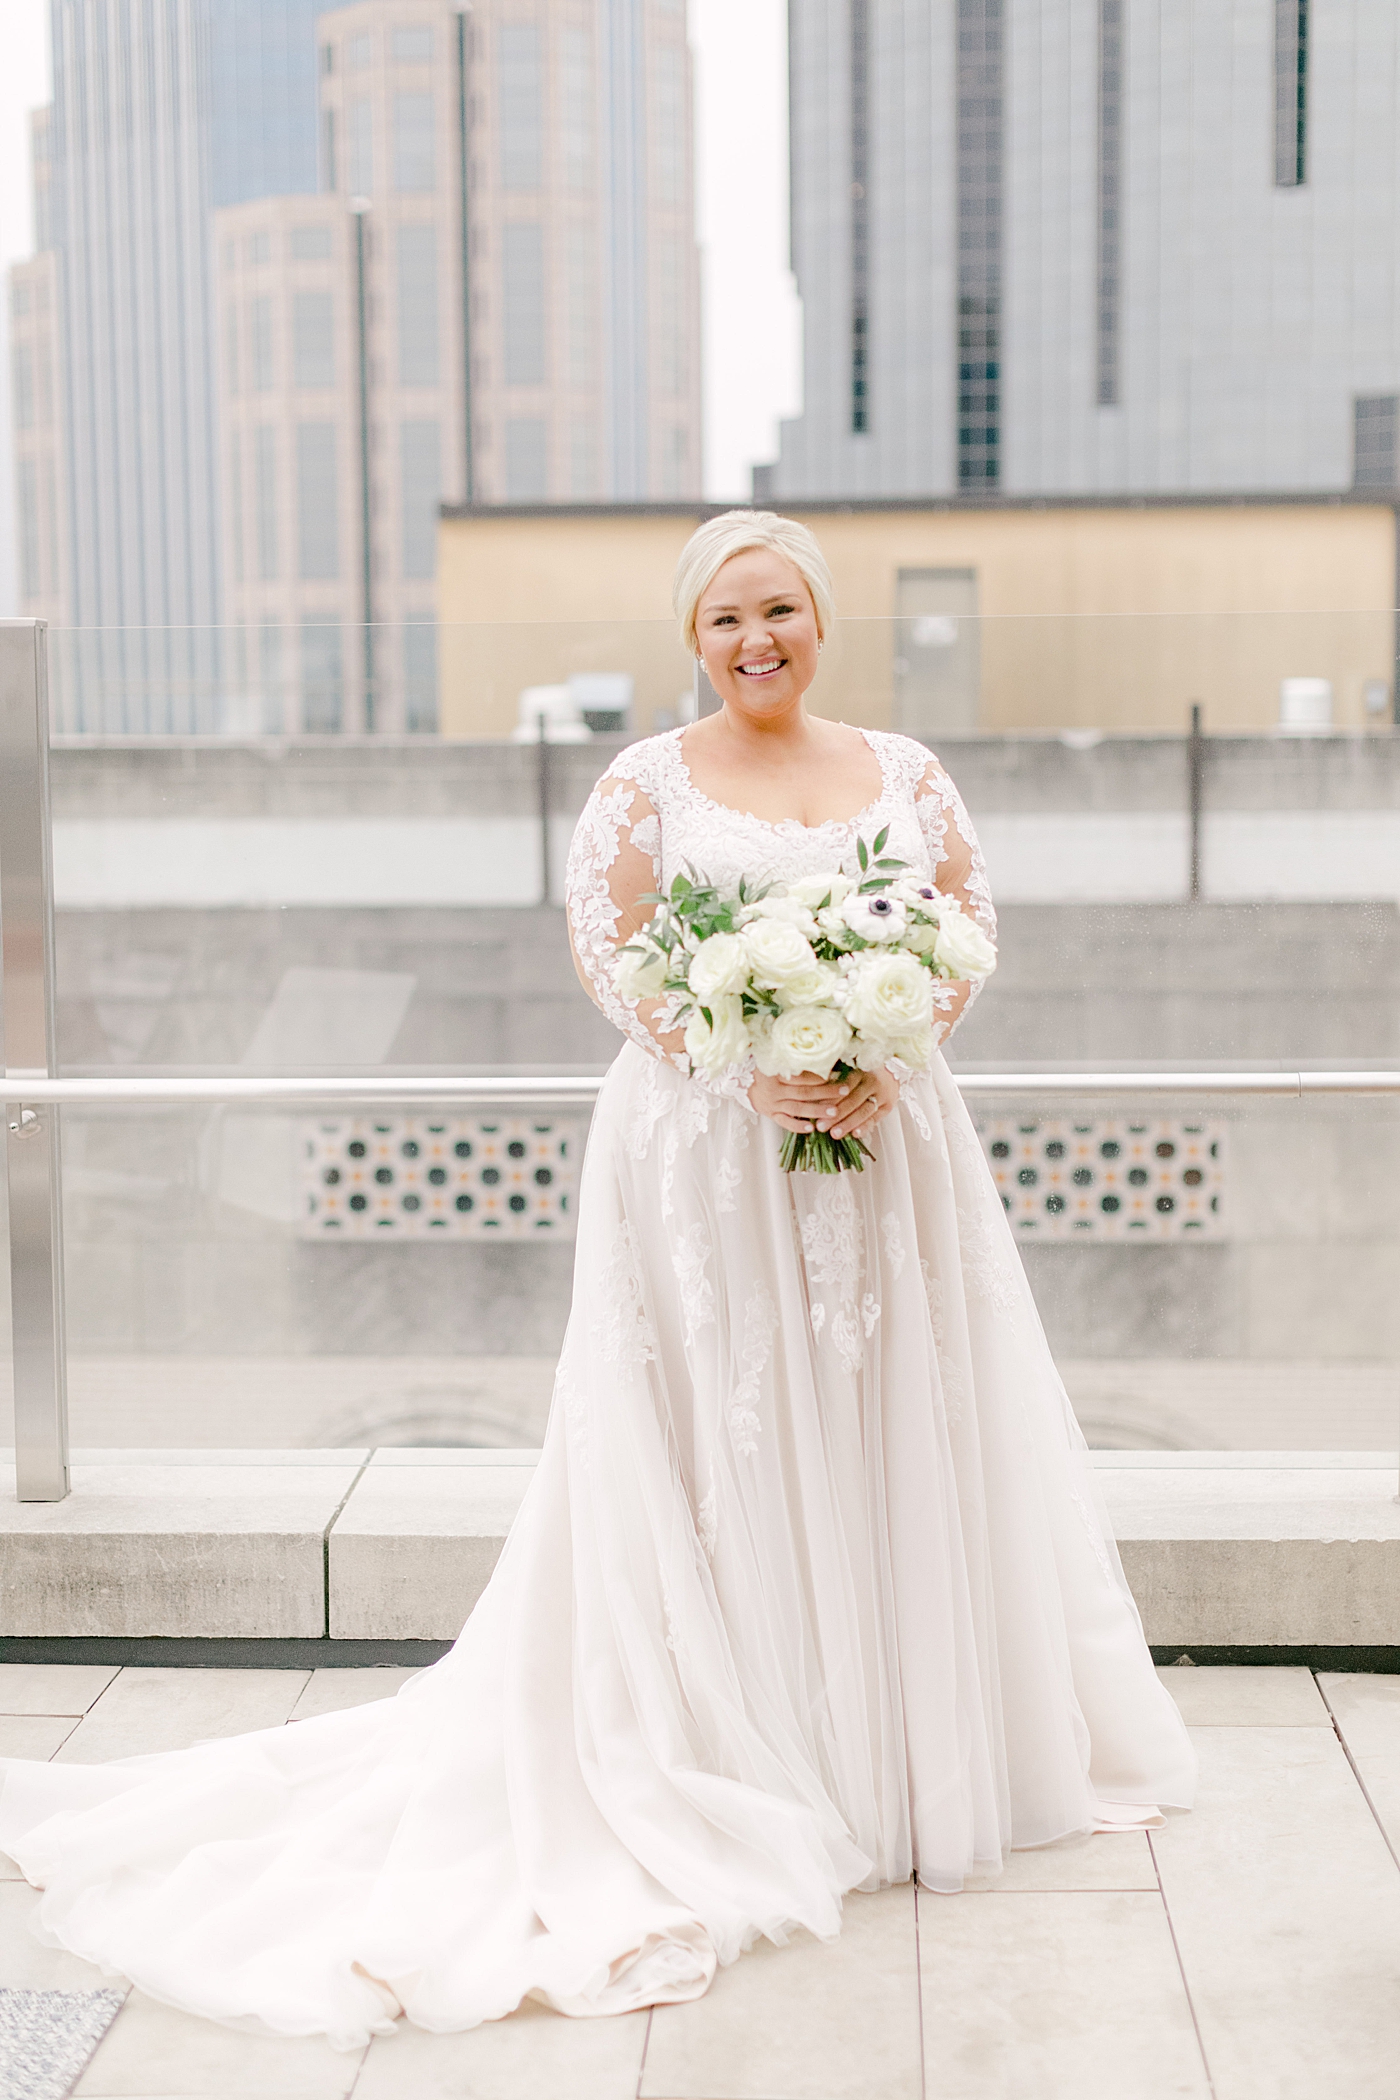 Bride with her bouquet on a rooftop during Noelle, Nashville Wedding | Photo by Hope Helmuth Photography